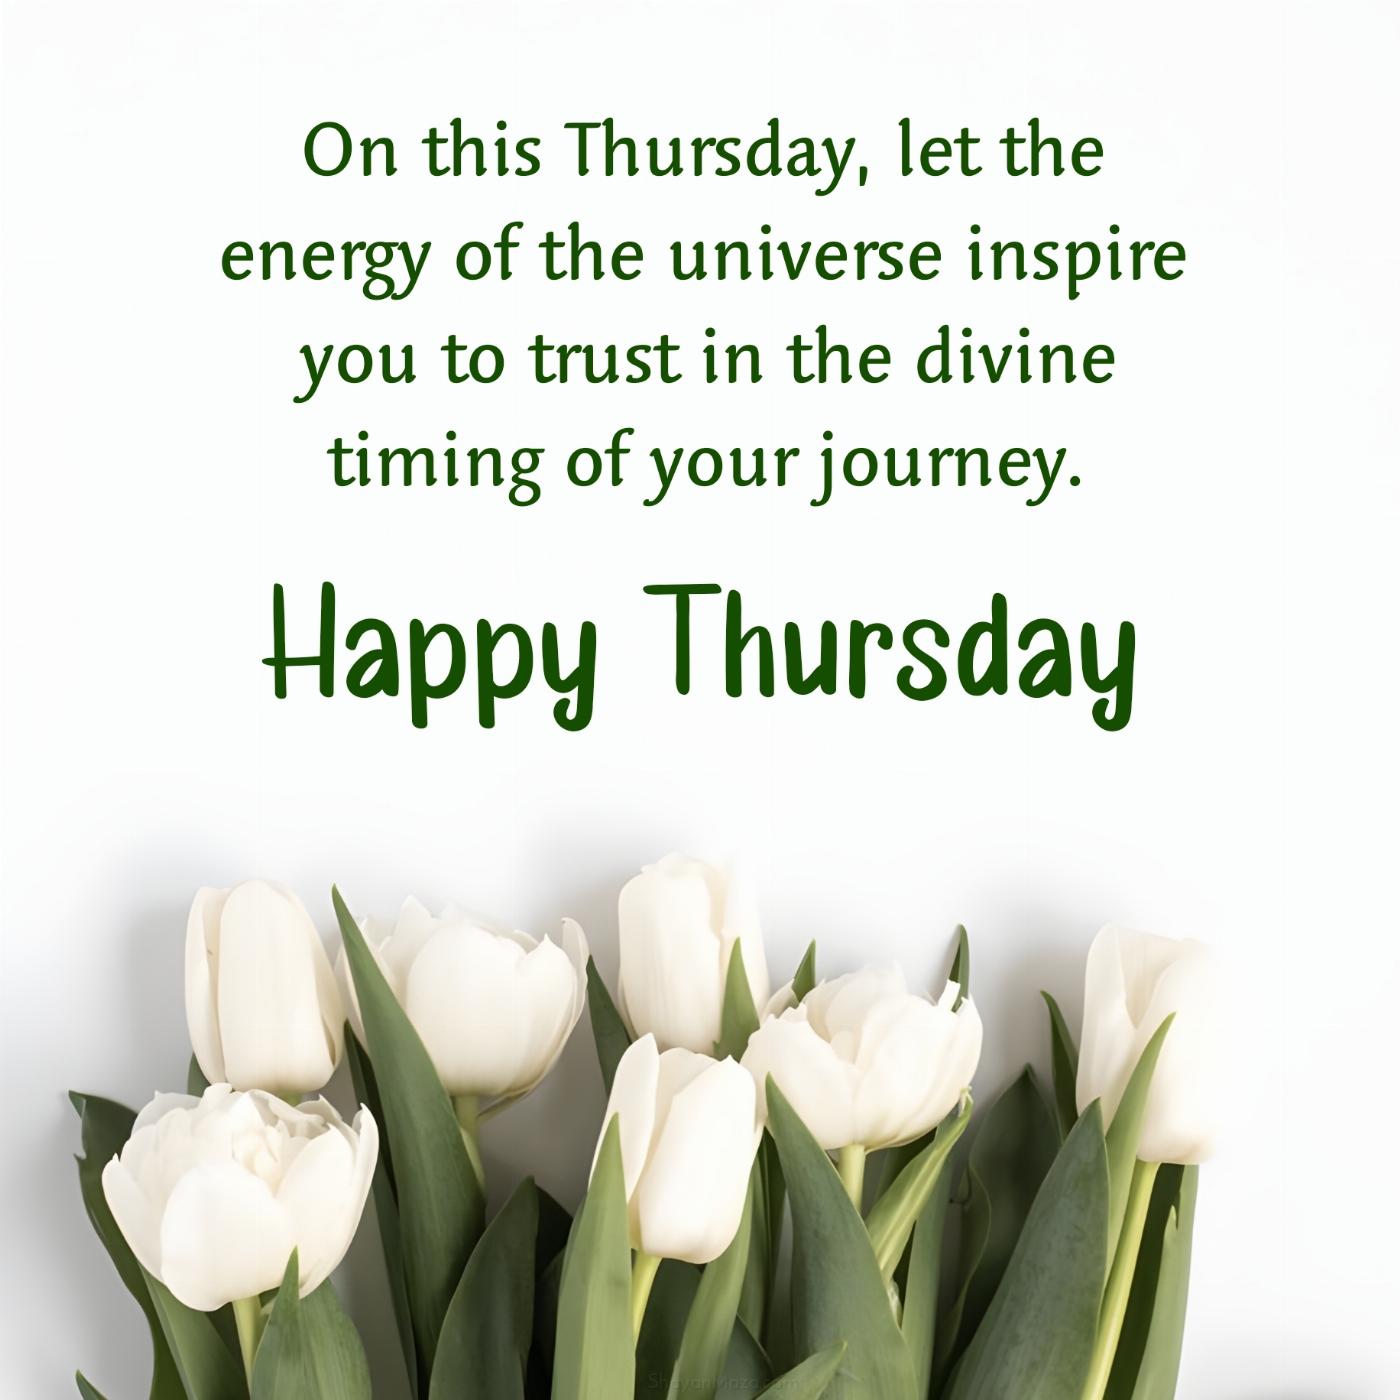 On this Thursday let the energy of the universe inspire you